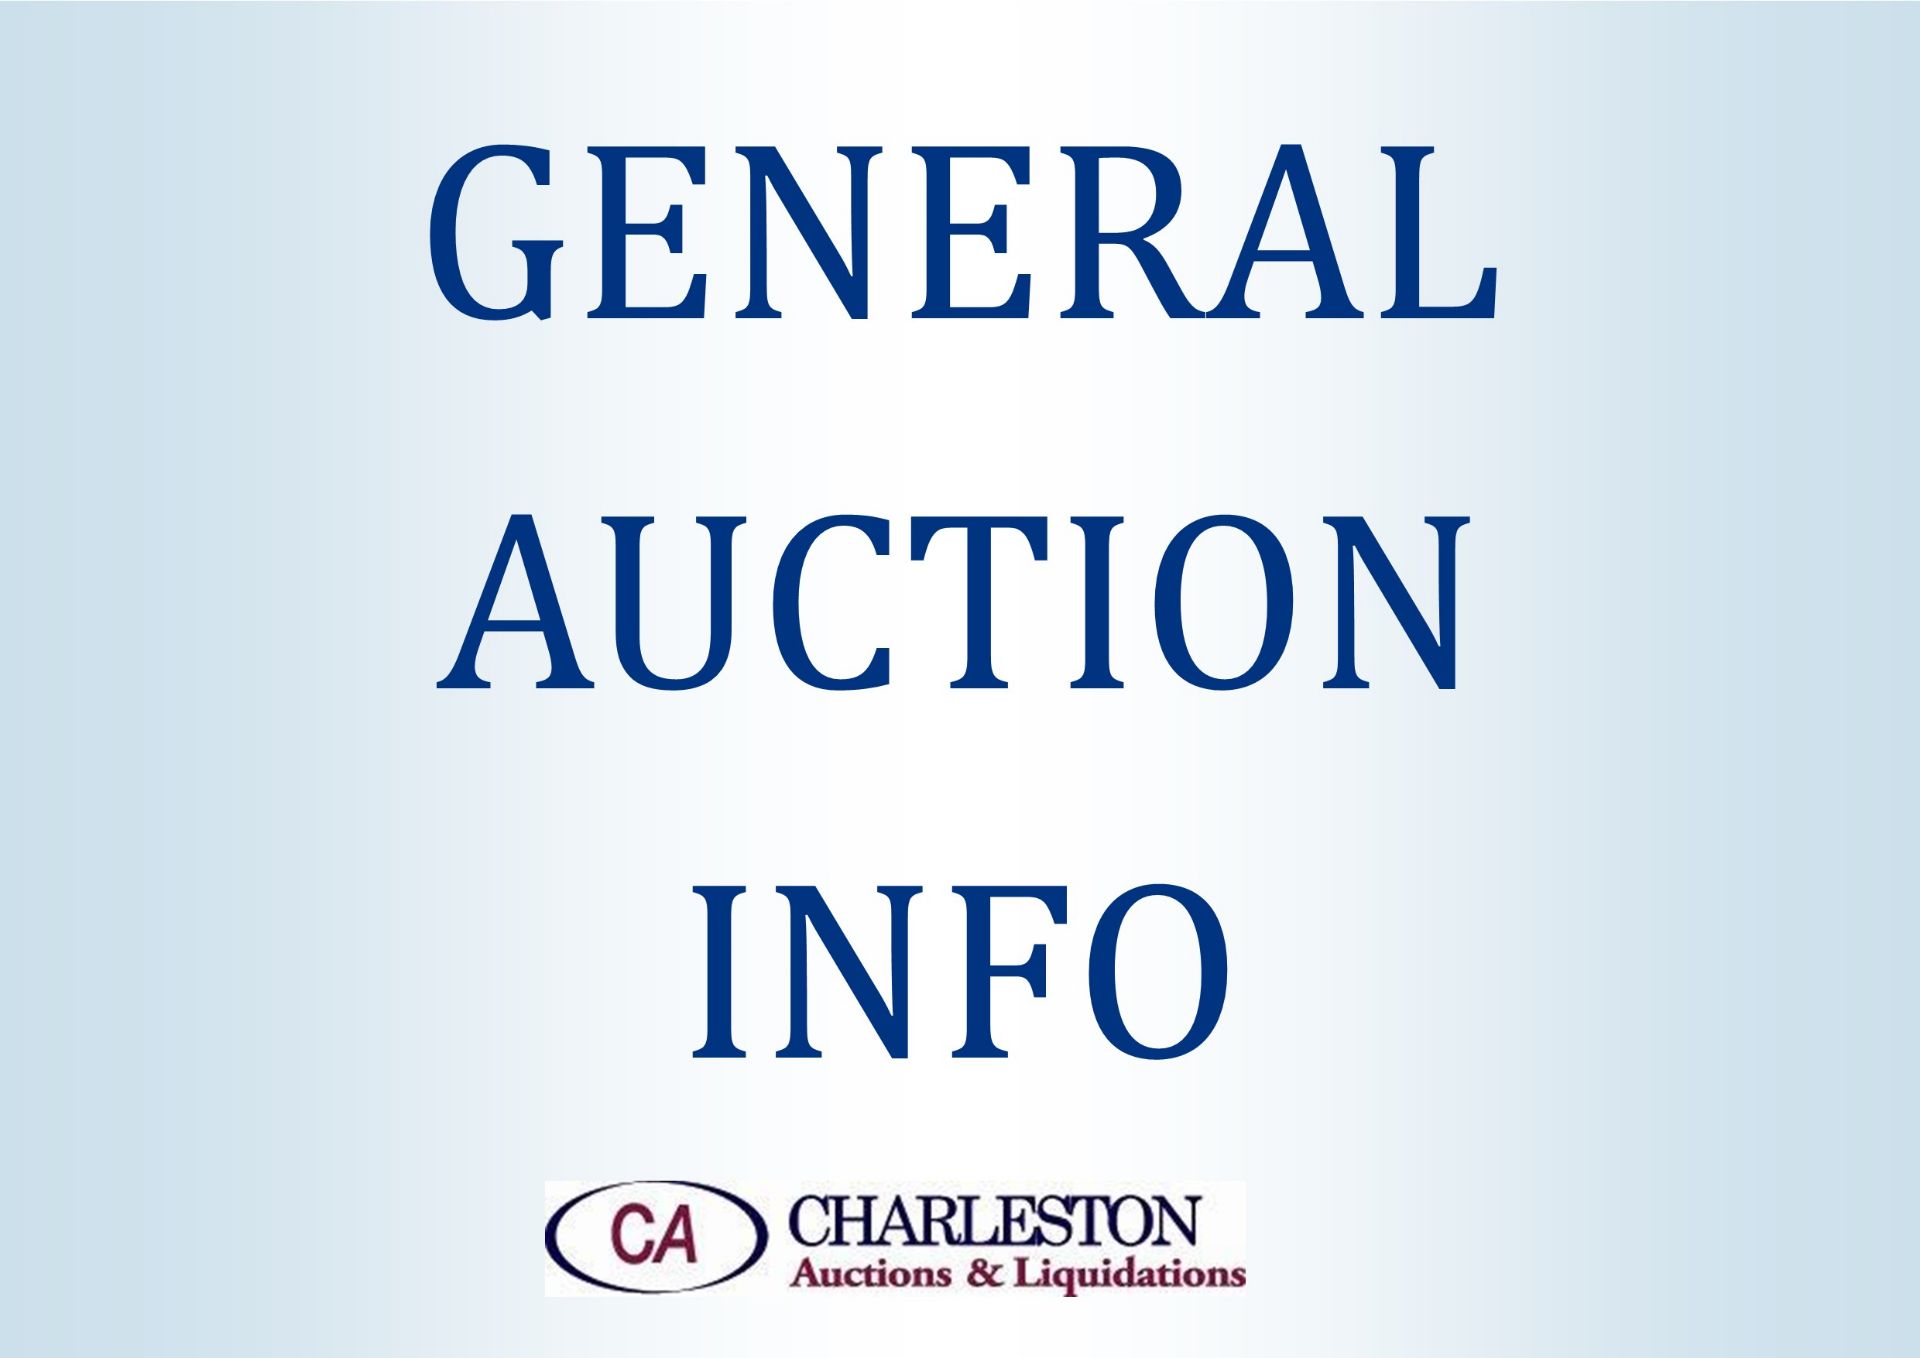 Timed online only auction will beign closing Wednesday, April 24th at 9:30 AM EST Equipment is